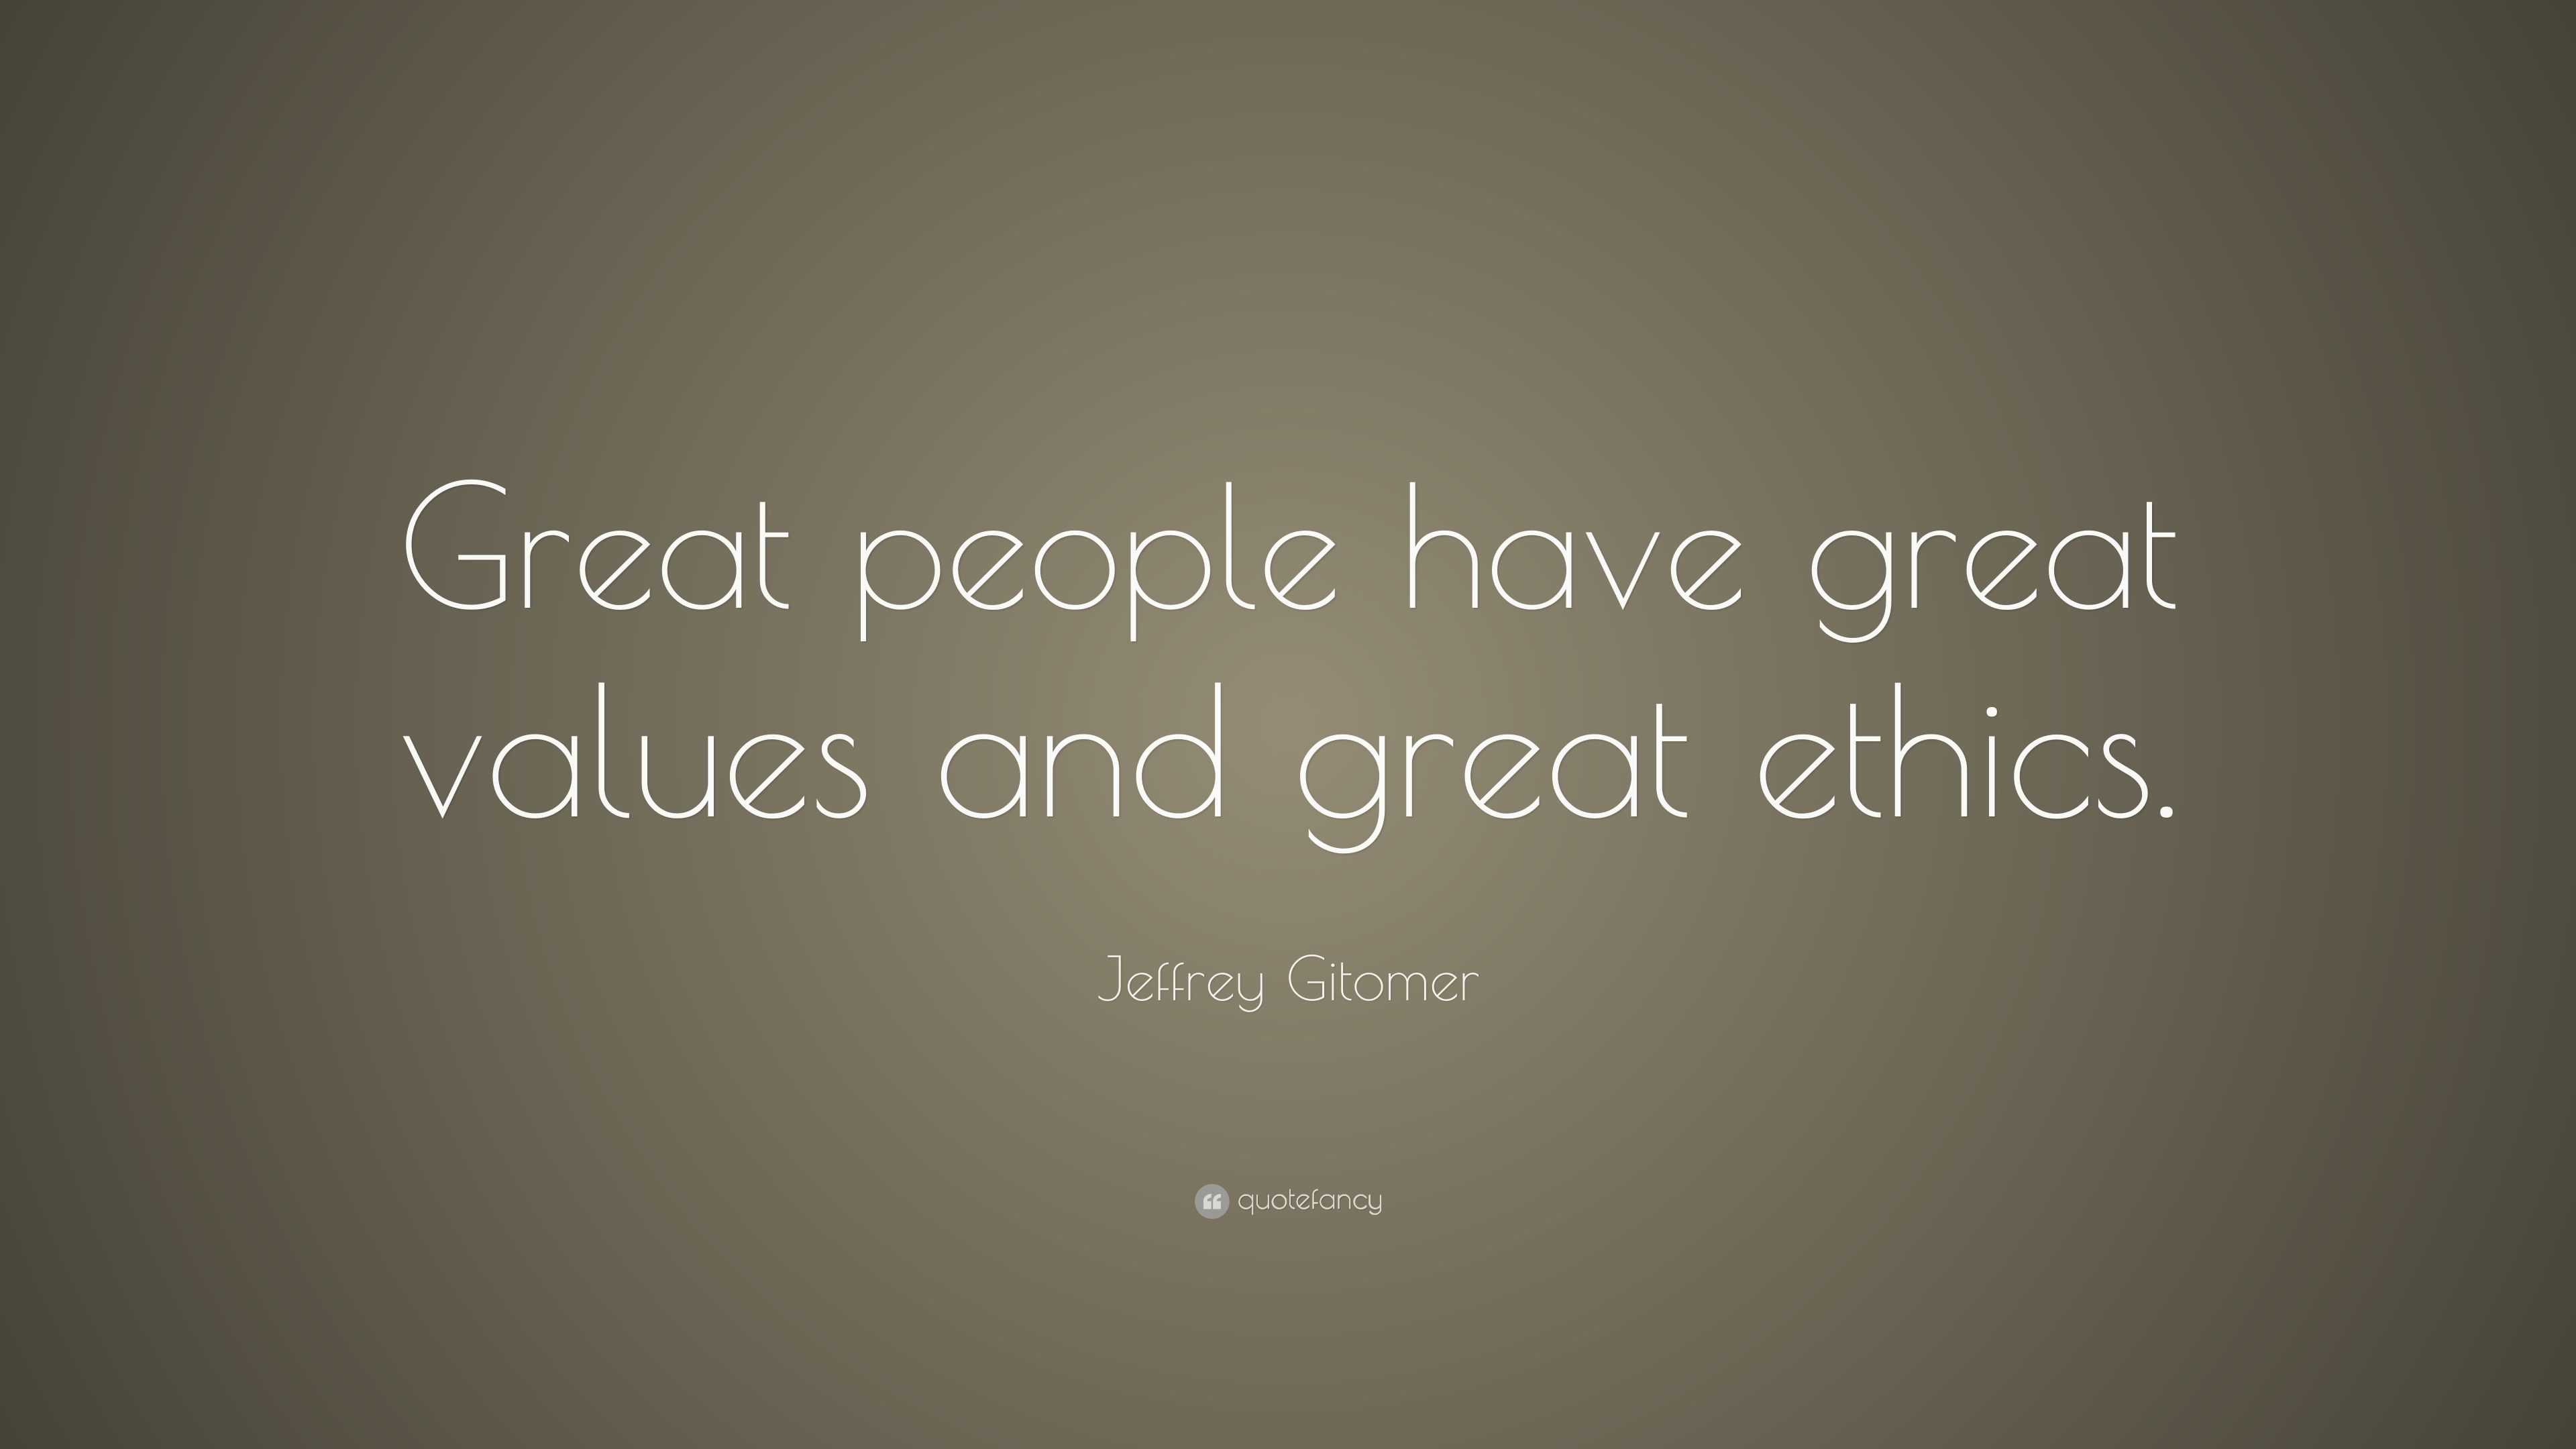 Jeffrey Gitomer Quote: “Great people have great values and great ethics.”